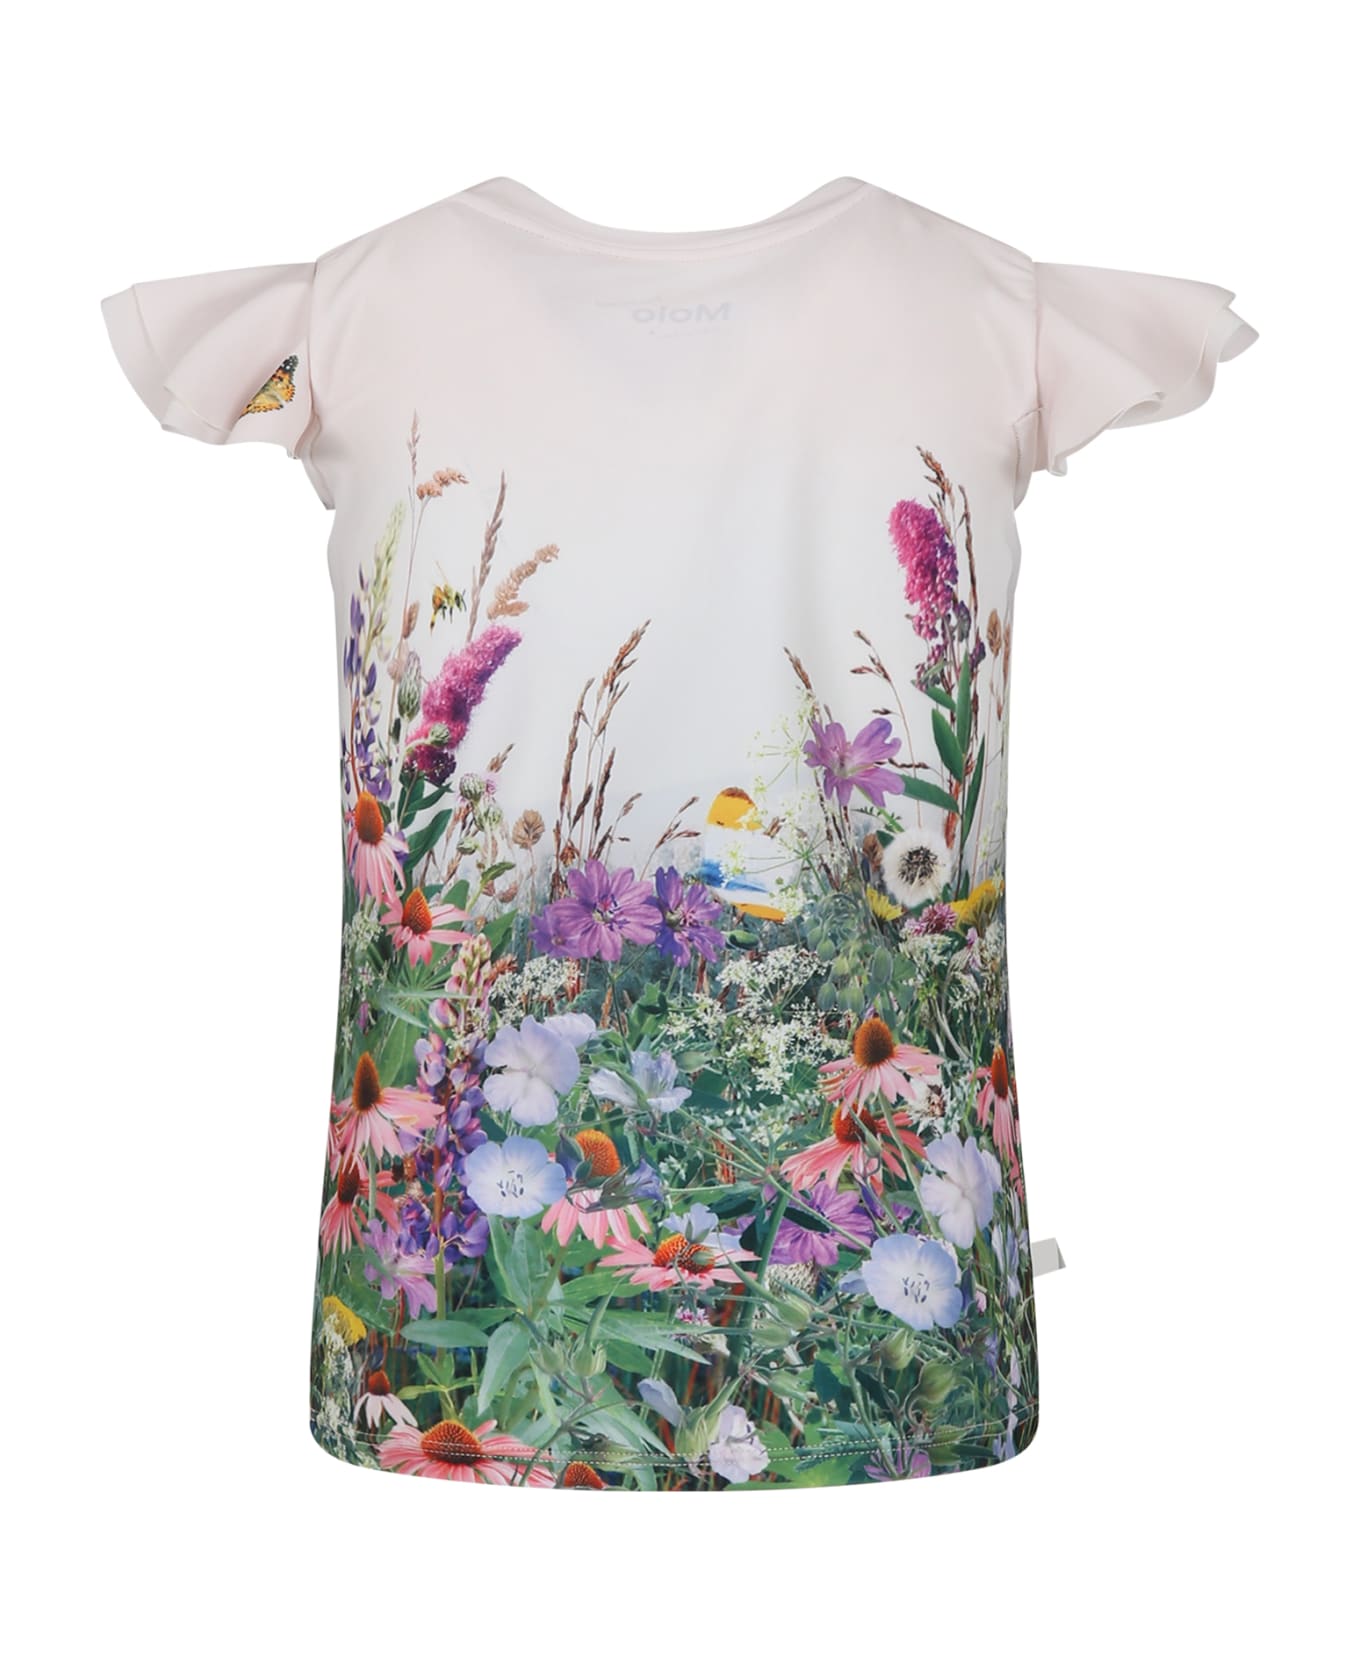 Molo Ivory Anti Uv T-shirt For Girl With Horses And Flowers Print - Ivory Tシャツ＆ポロシャツ